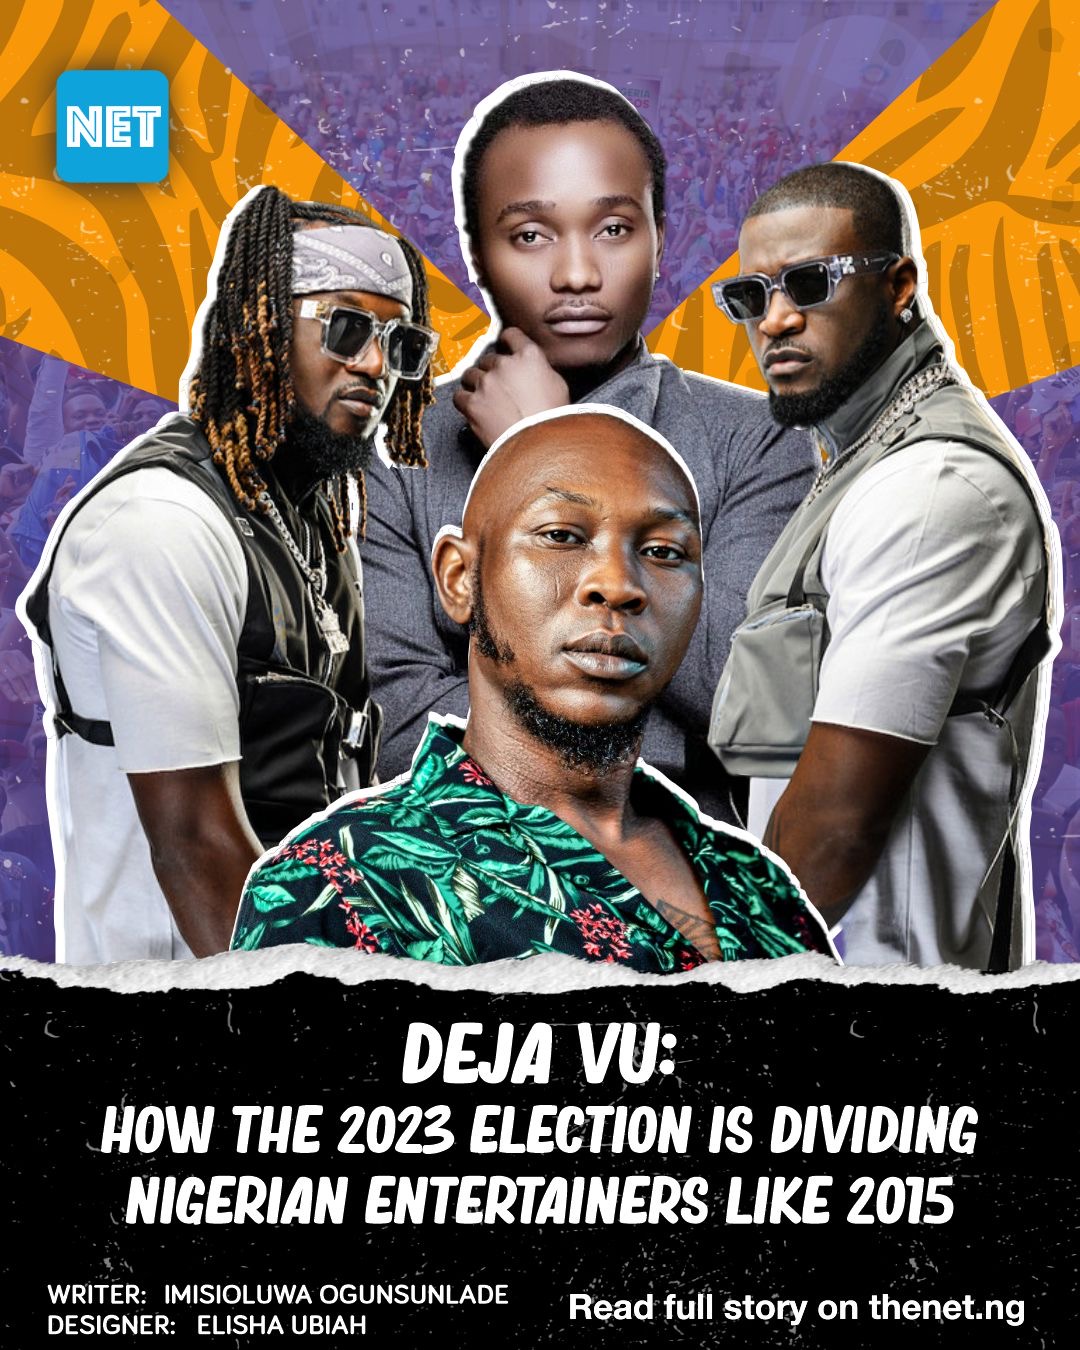 2023 elections is dividing Nigerians like 2015